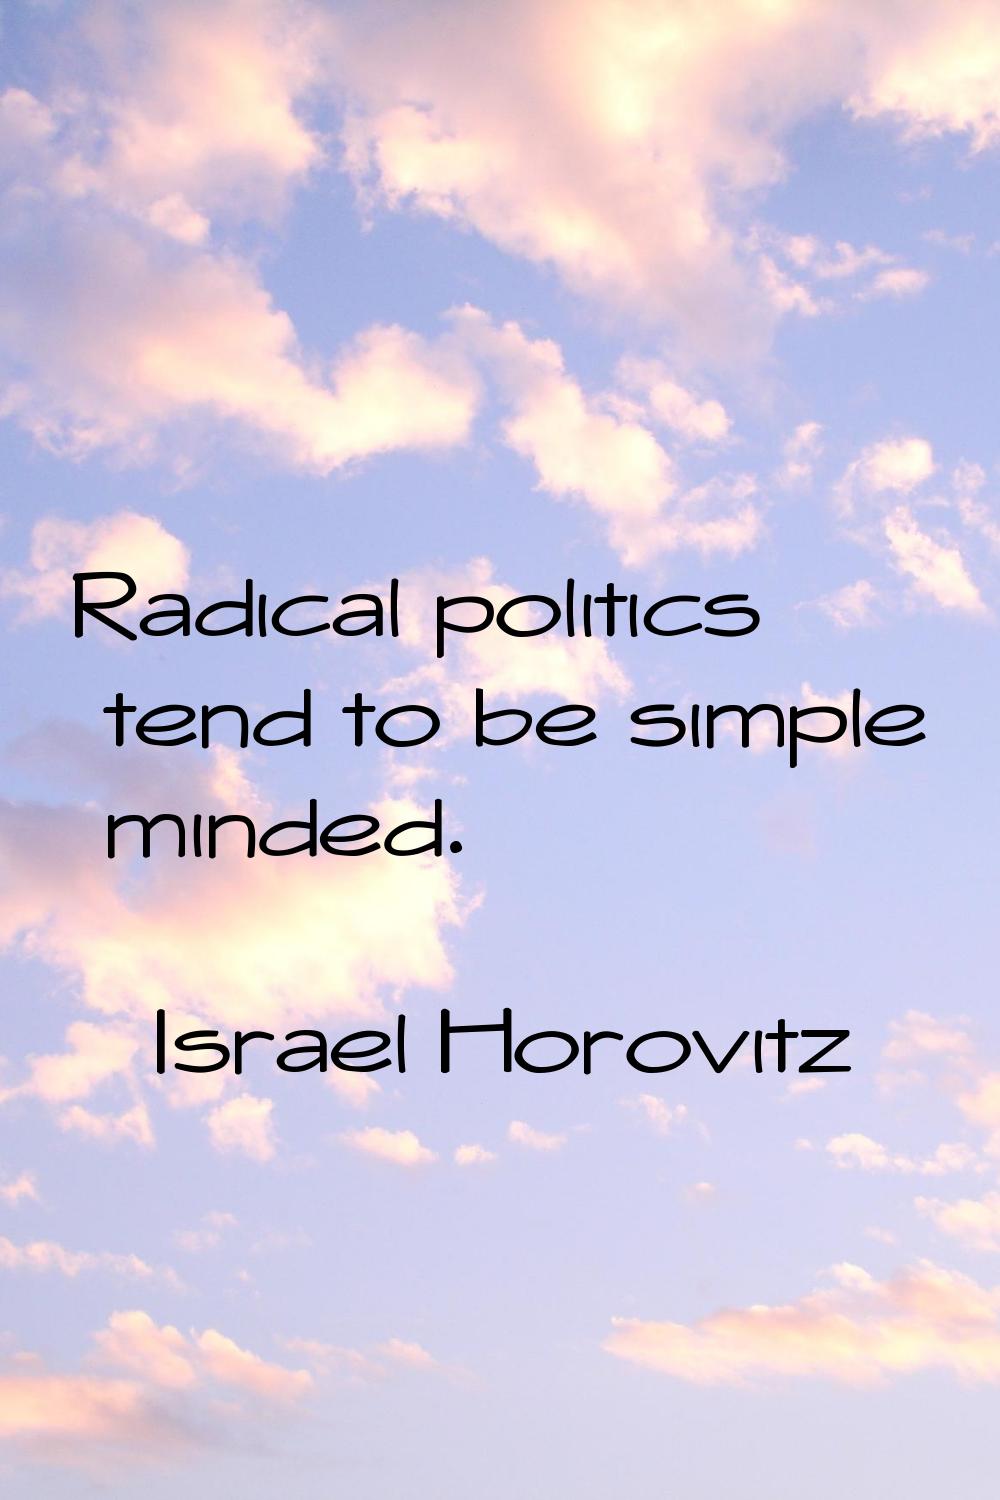 Radical politics tend to be simple minded.